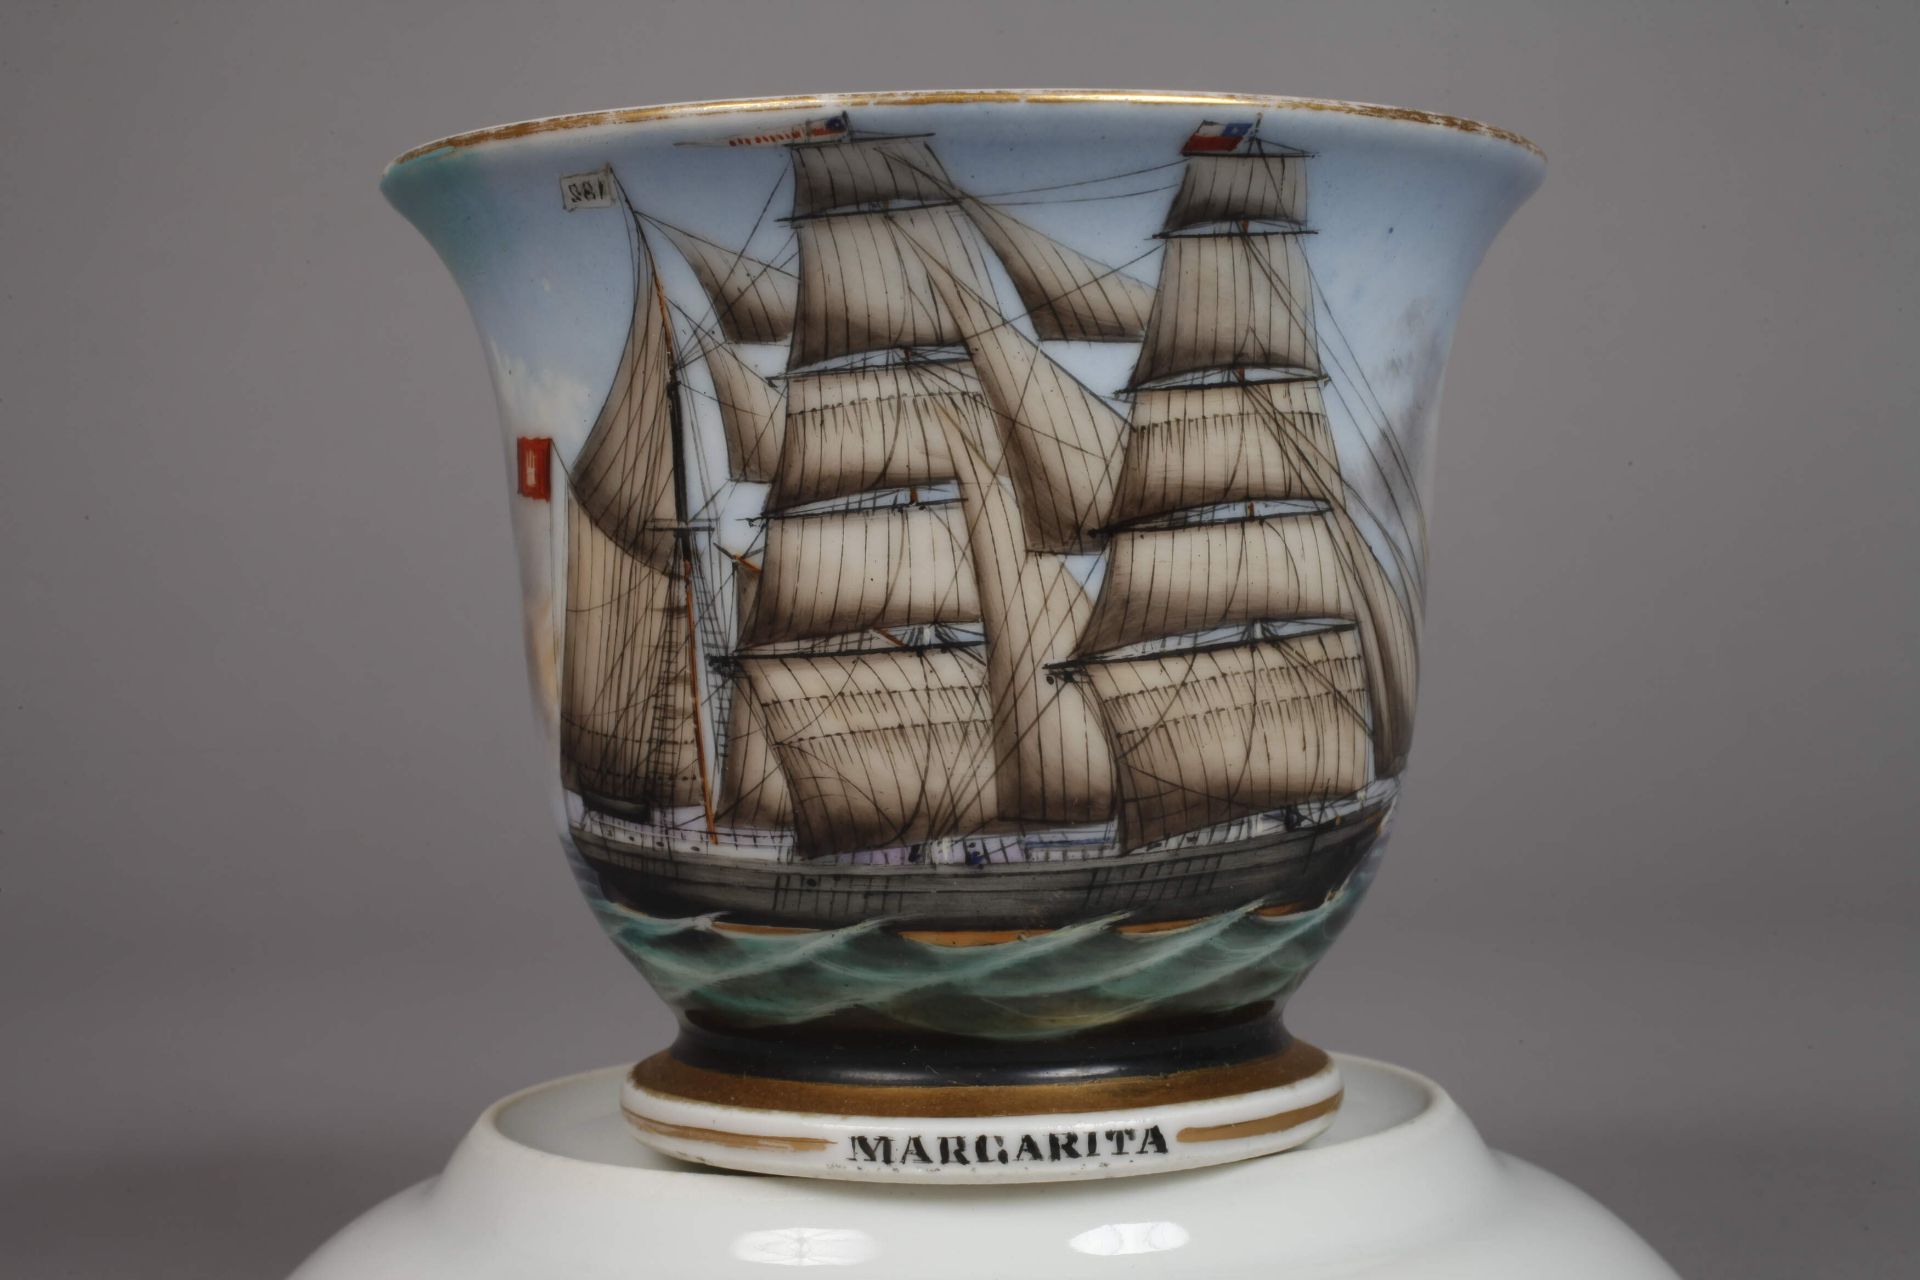 Captain's cup with sailing ship "Margarita" - Image 4 of 5